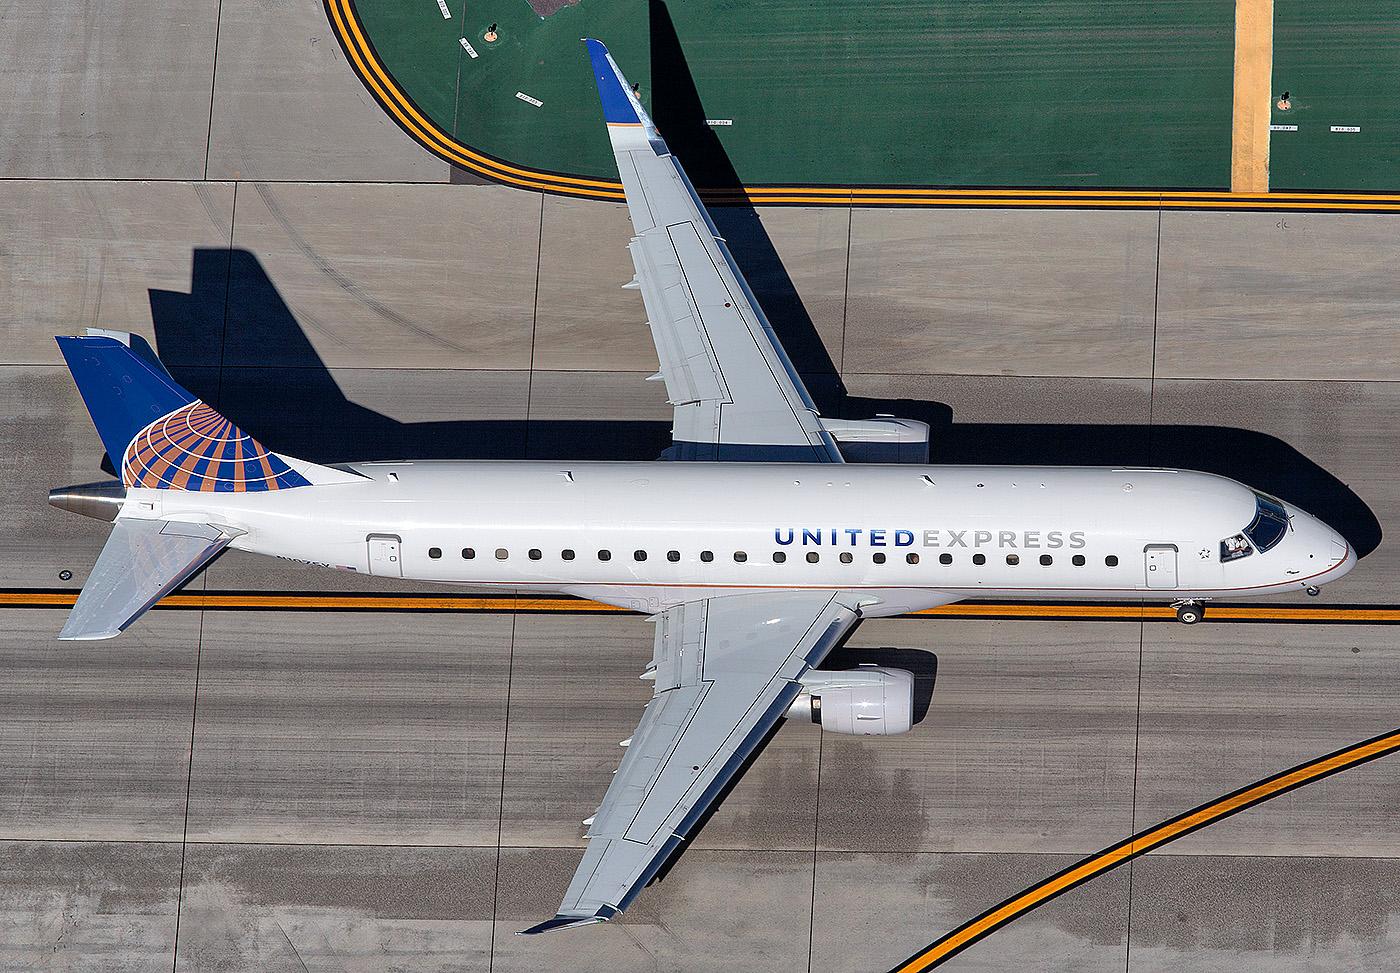 United Modifying E175s To Operate With 70 Seats Aviation Week Network